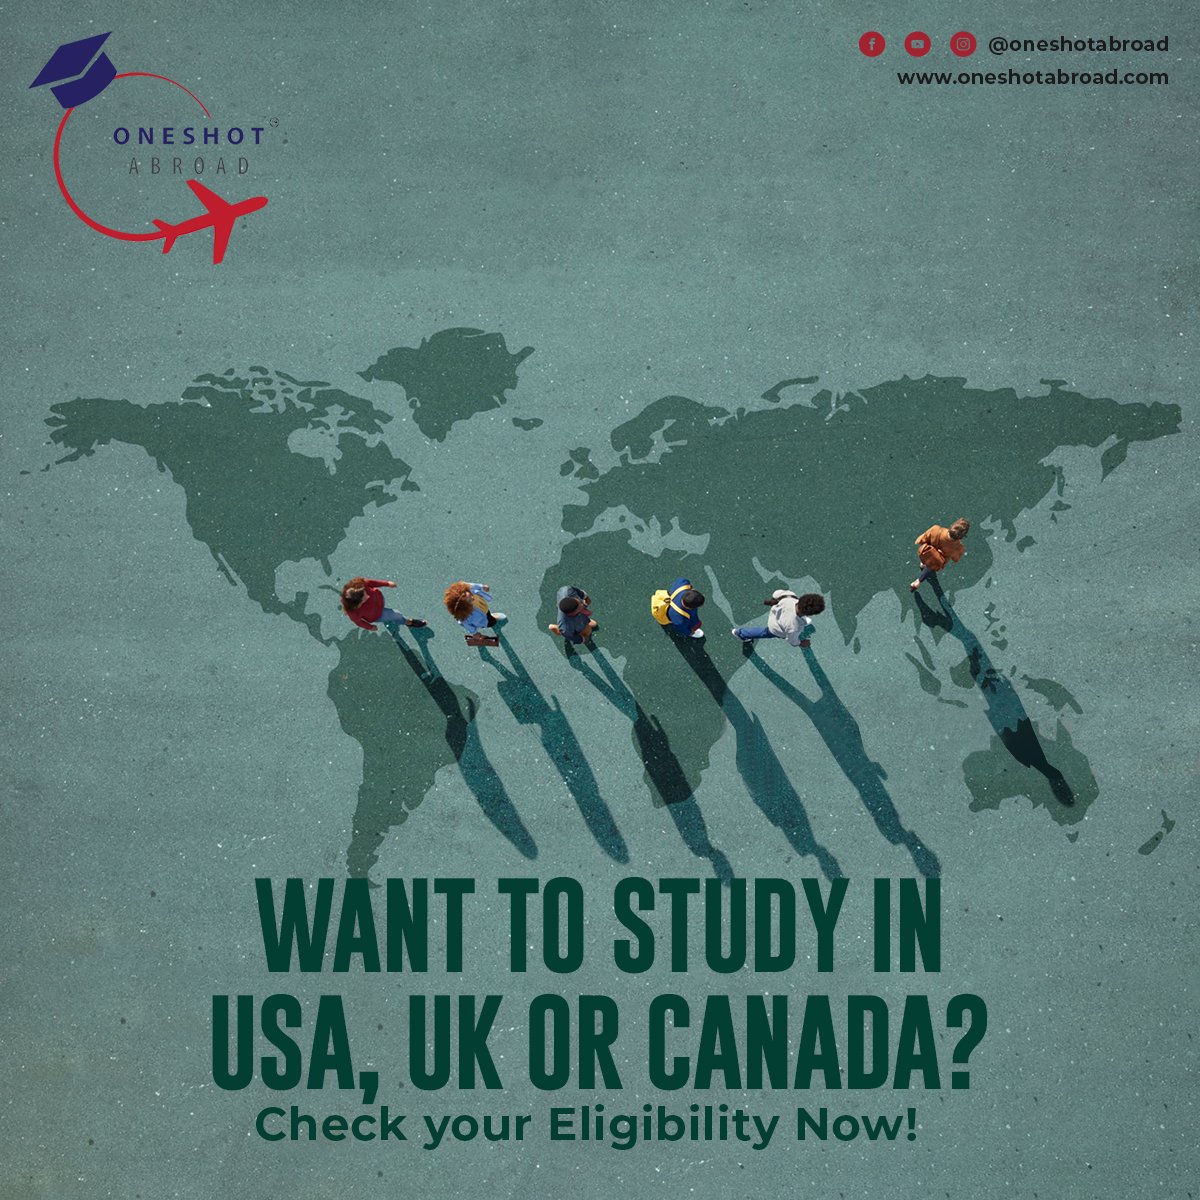 Want to Study in USA, UK or Canada ?

Enroll Now @oneshotabroad 

.
.
.
.
.
#studyincanada #studyinuk #studyinusa #studyabroad #expertcounsellor #expertcounselling #studyabroadconsultants #education